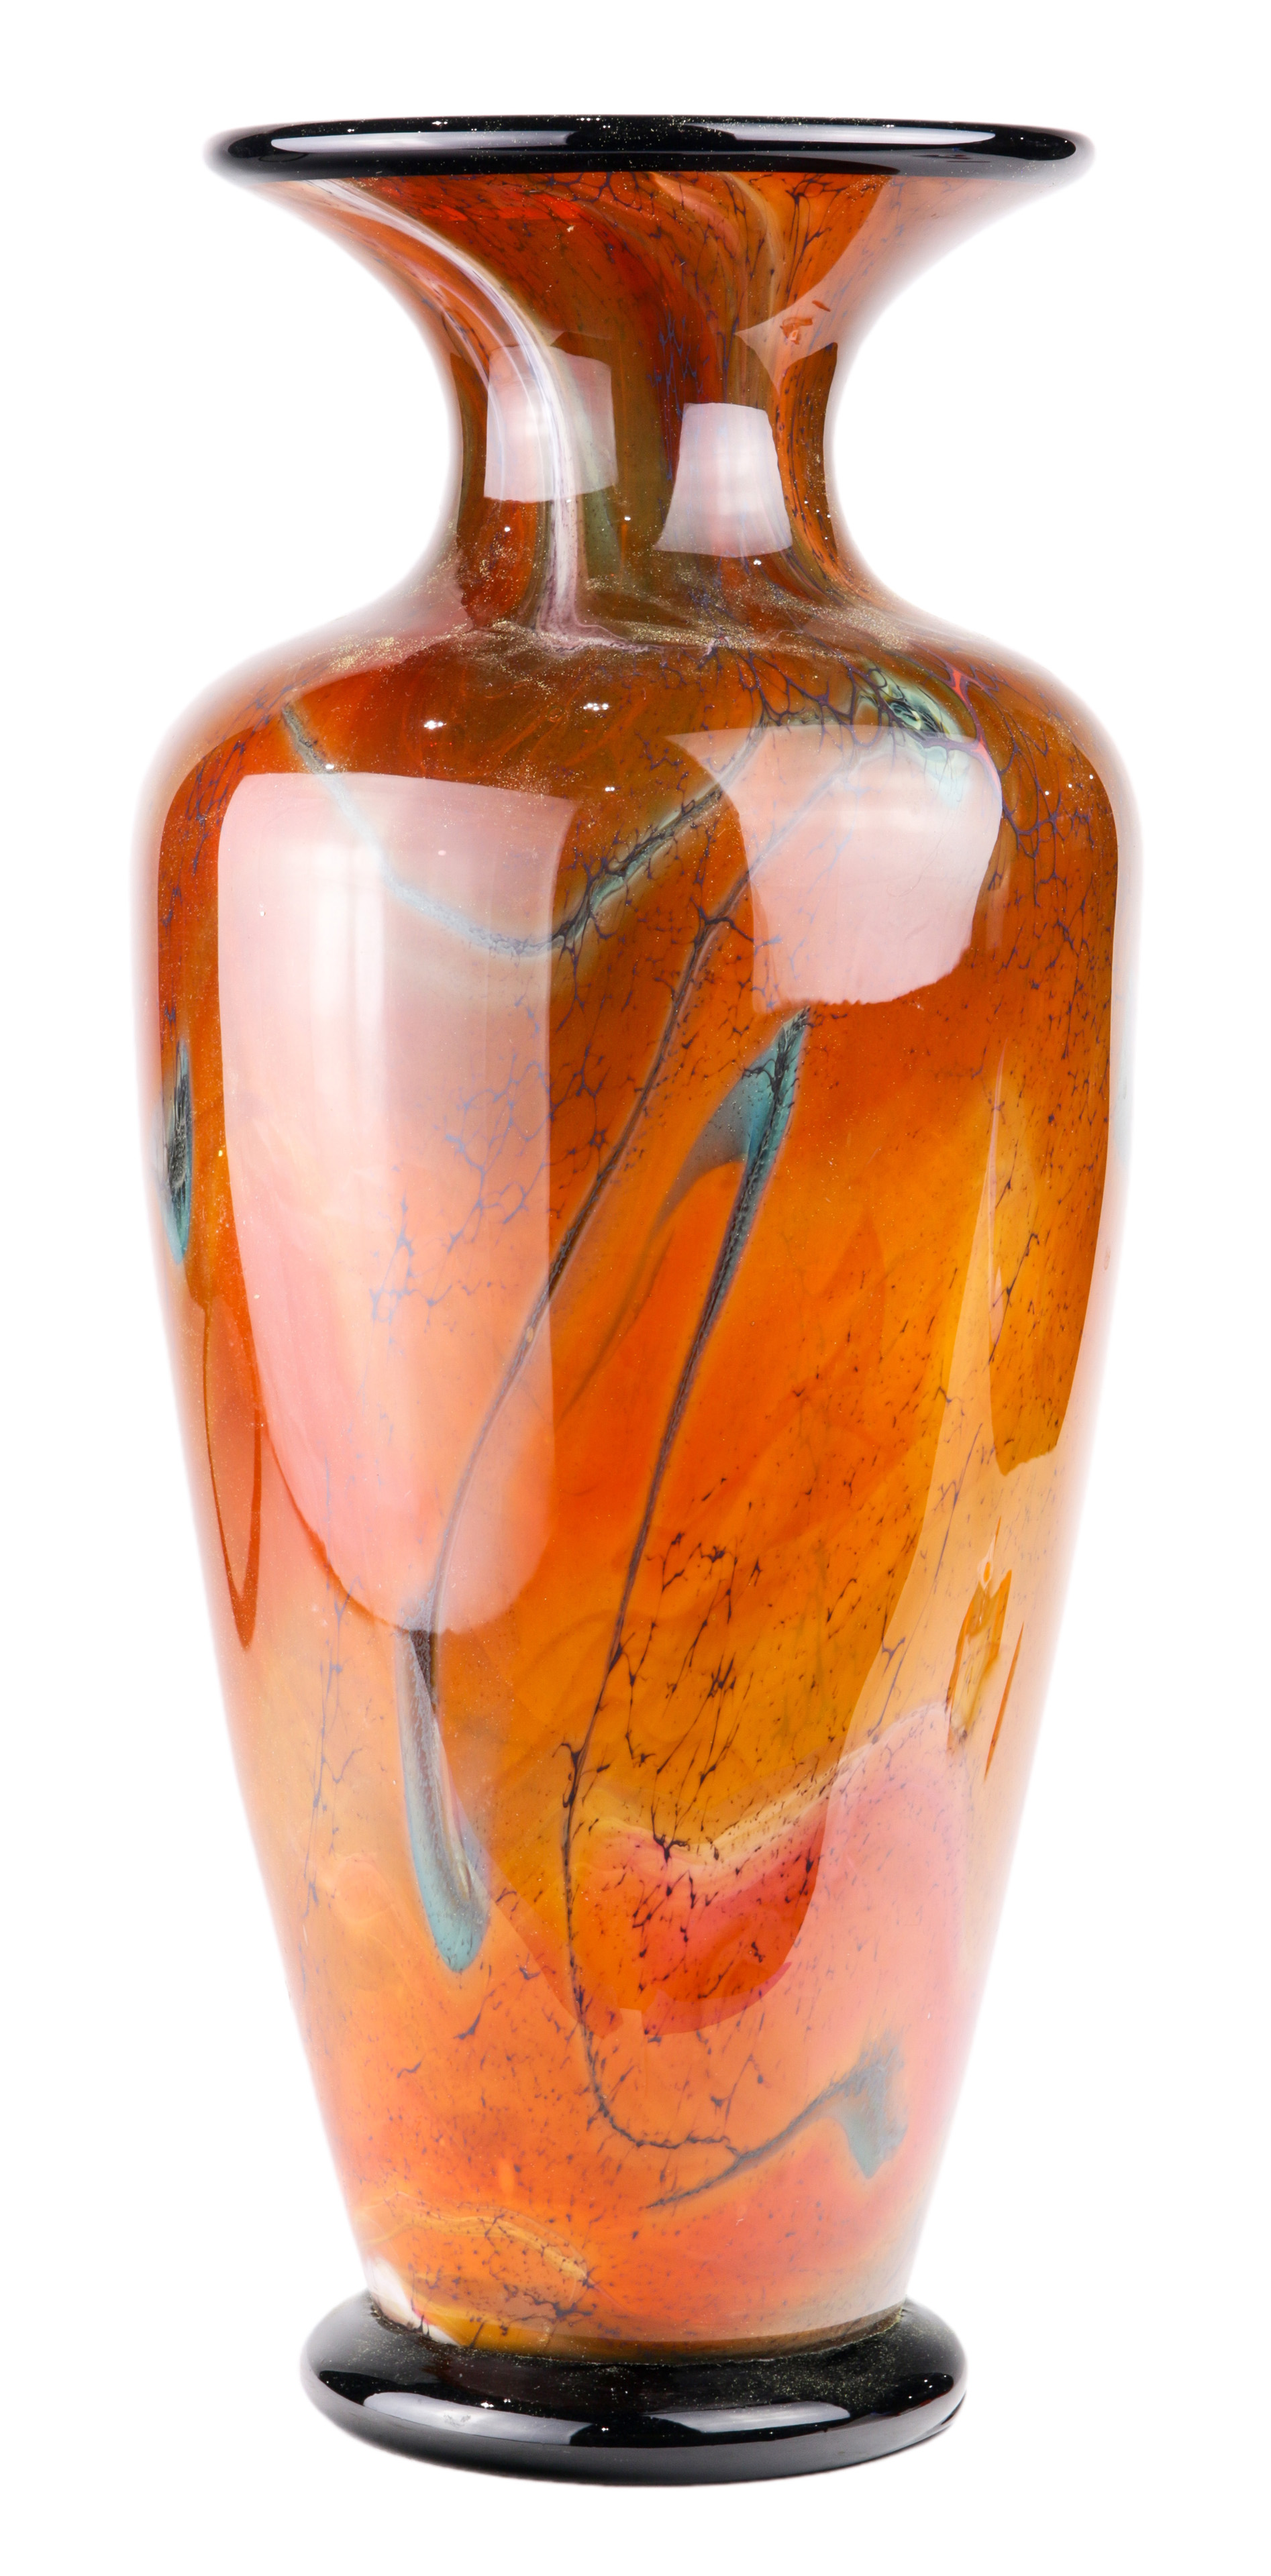 A LACHAUSSEE ART GLASS VASE EXECUTED 3a6406